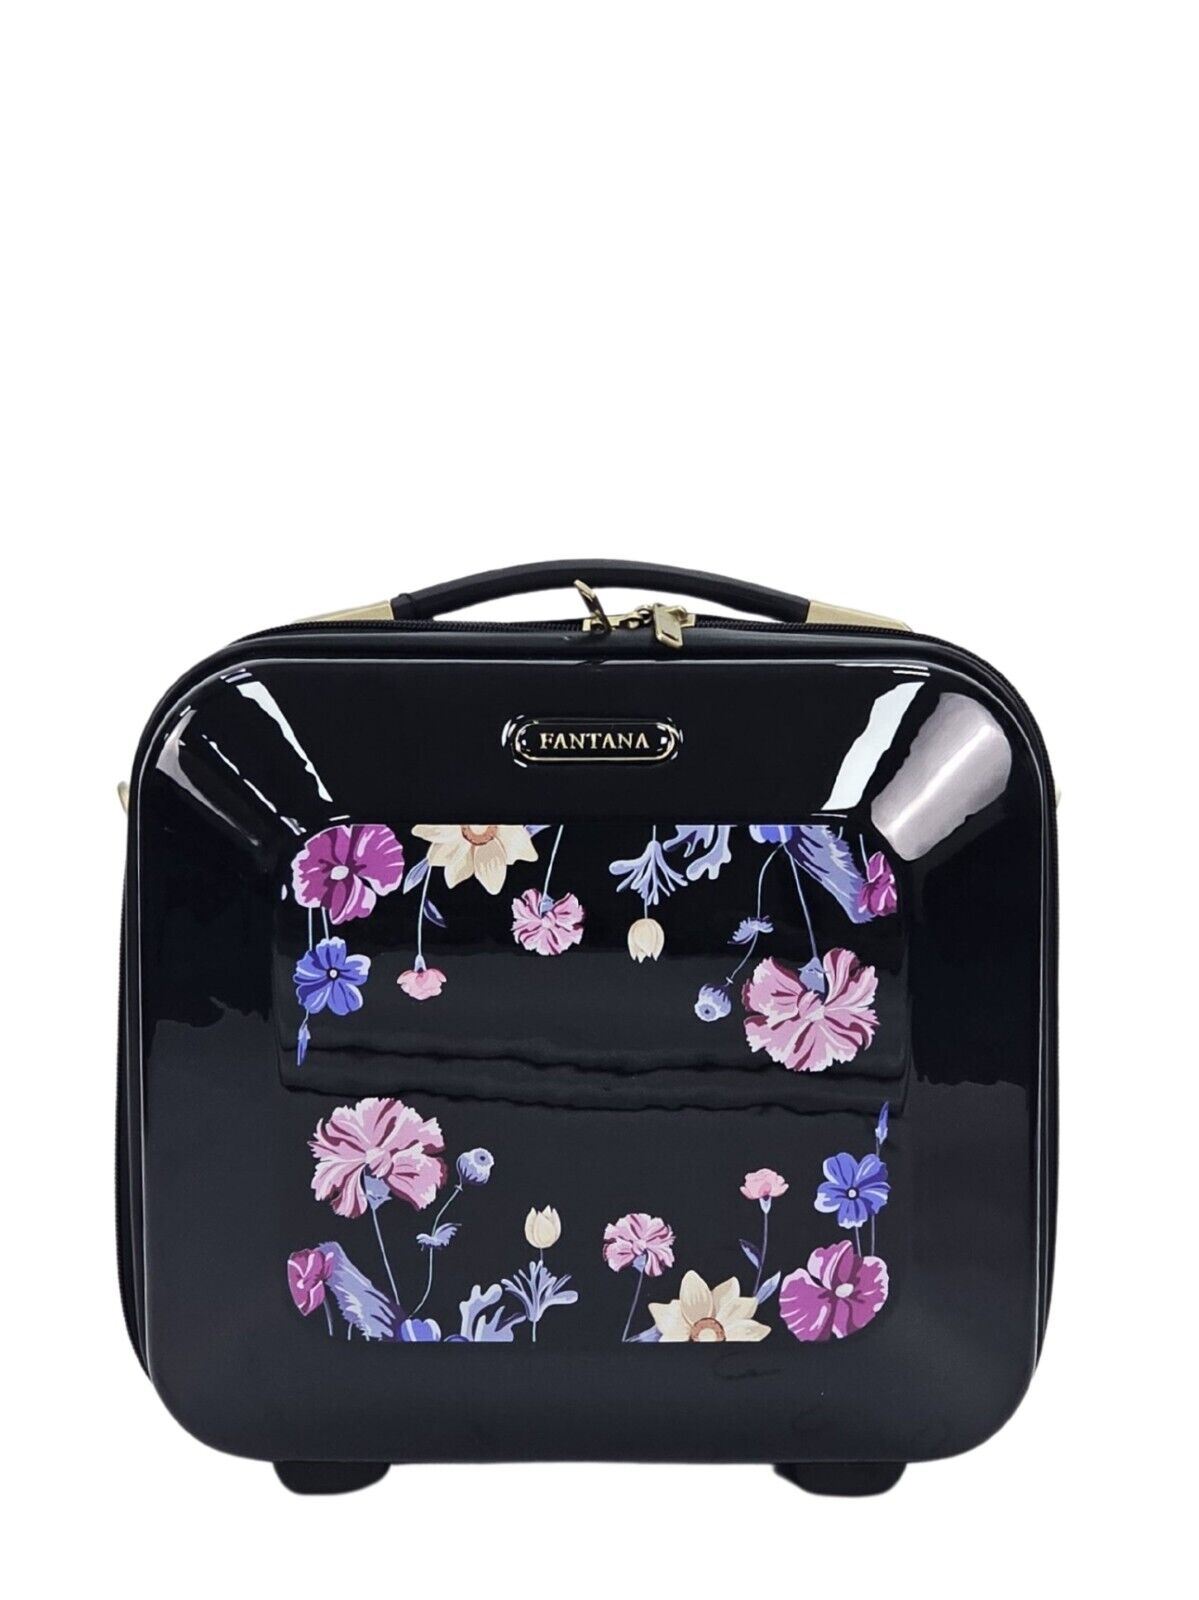 Butler Cosmetic Hard Shell Suitcase in Black